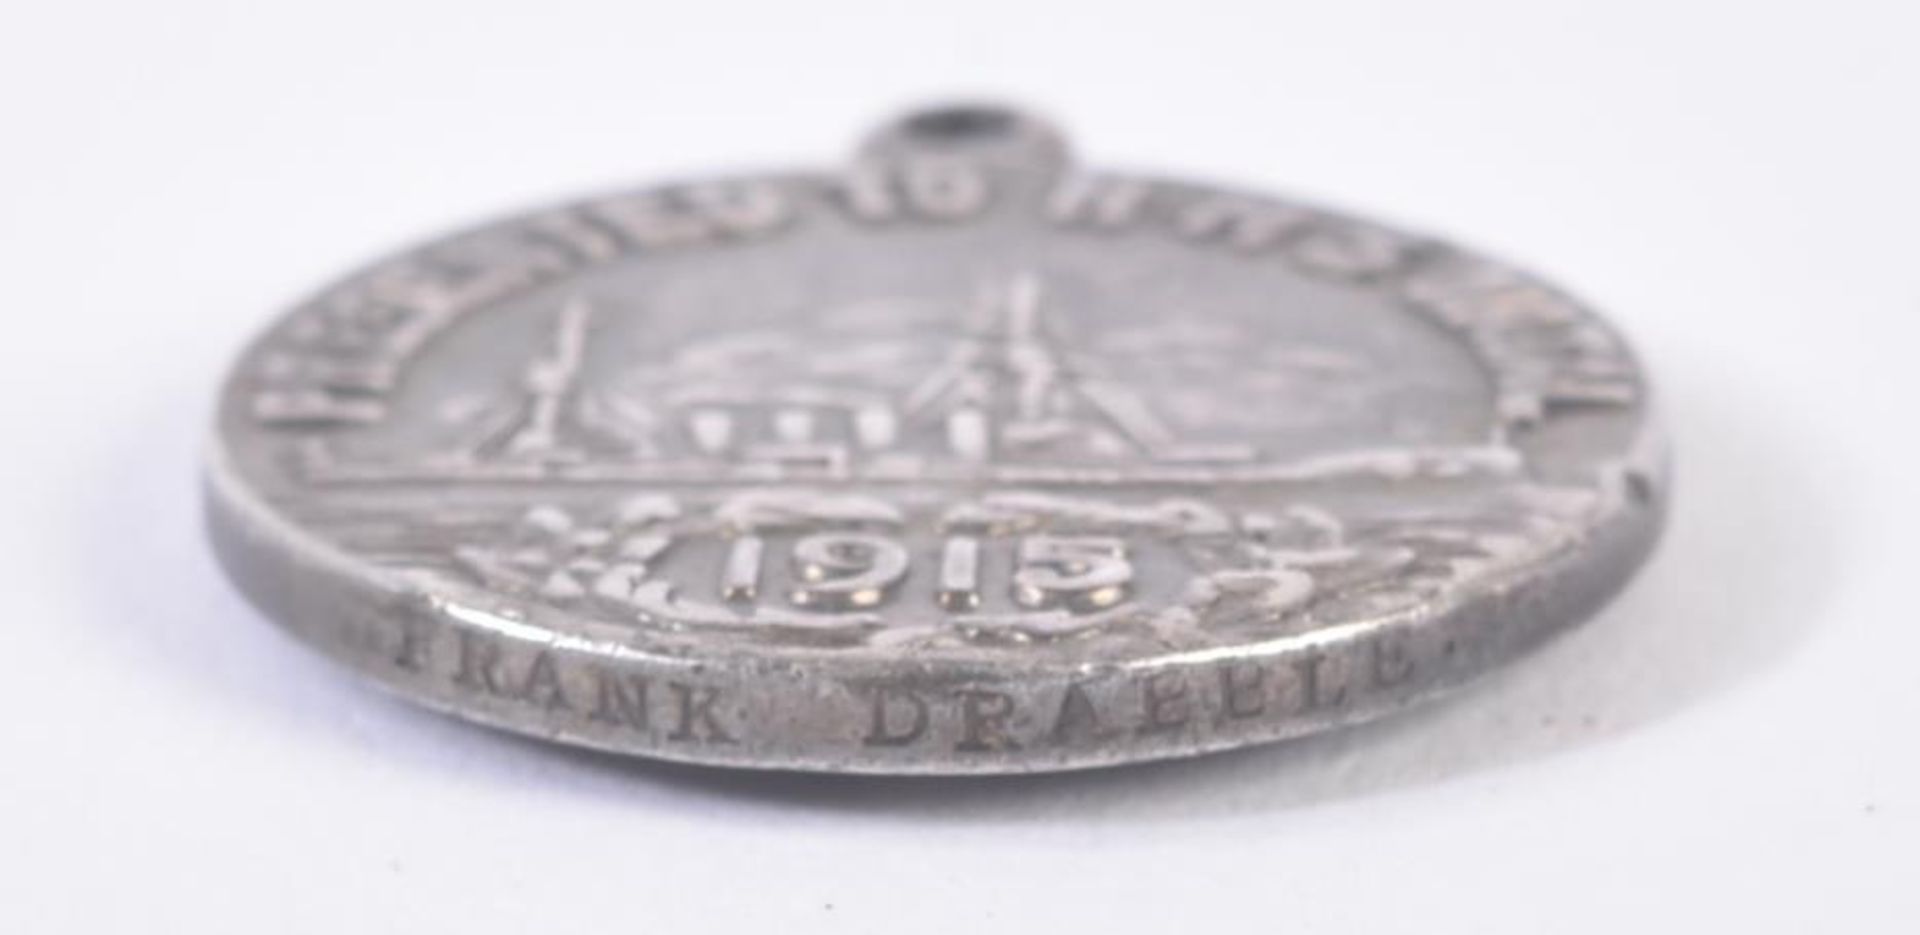 WWI FIRST WORLD WAR - SCARCE HMS NATAL MEDAL - Image 4 of 4